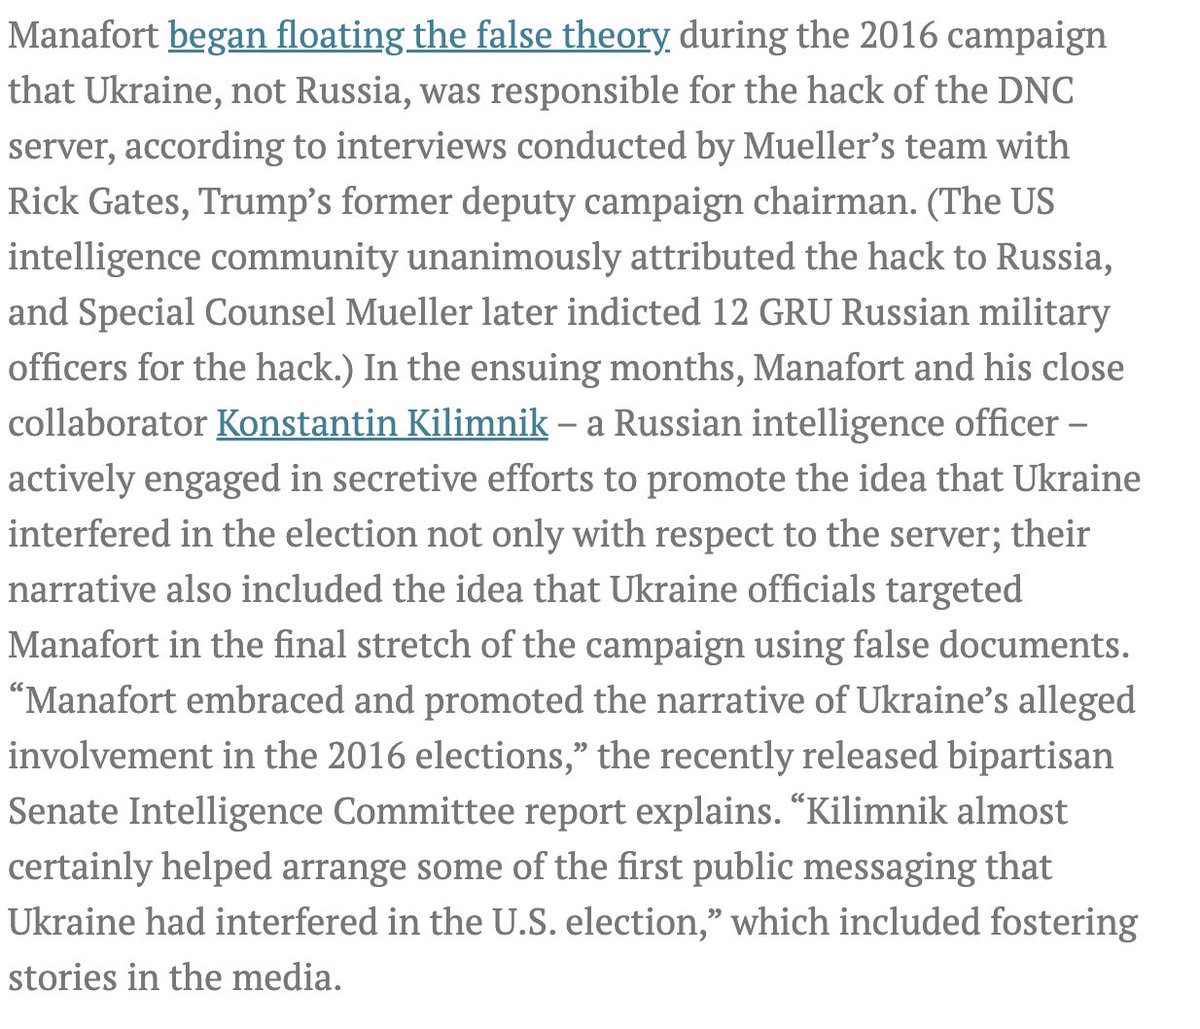 Since Trump is planning to bring back characters from Season 1 into his campaign, reupping this piece that @rgoodlaw and I wrote for @just_security back in 2020: Don't forget that Manafort began floating the conspiracy theory that Ukraine, not Russia, interfered in the 2016